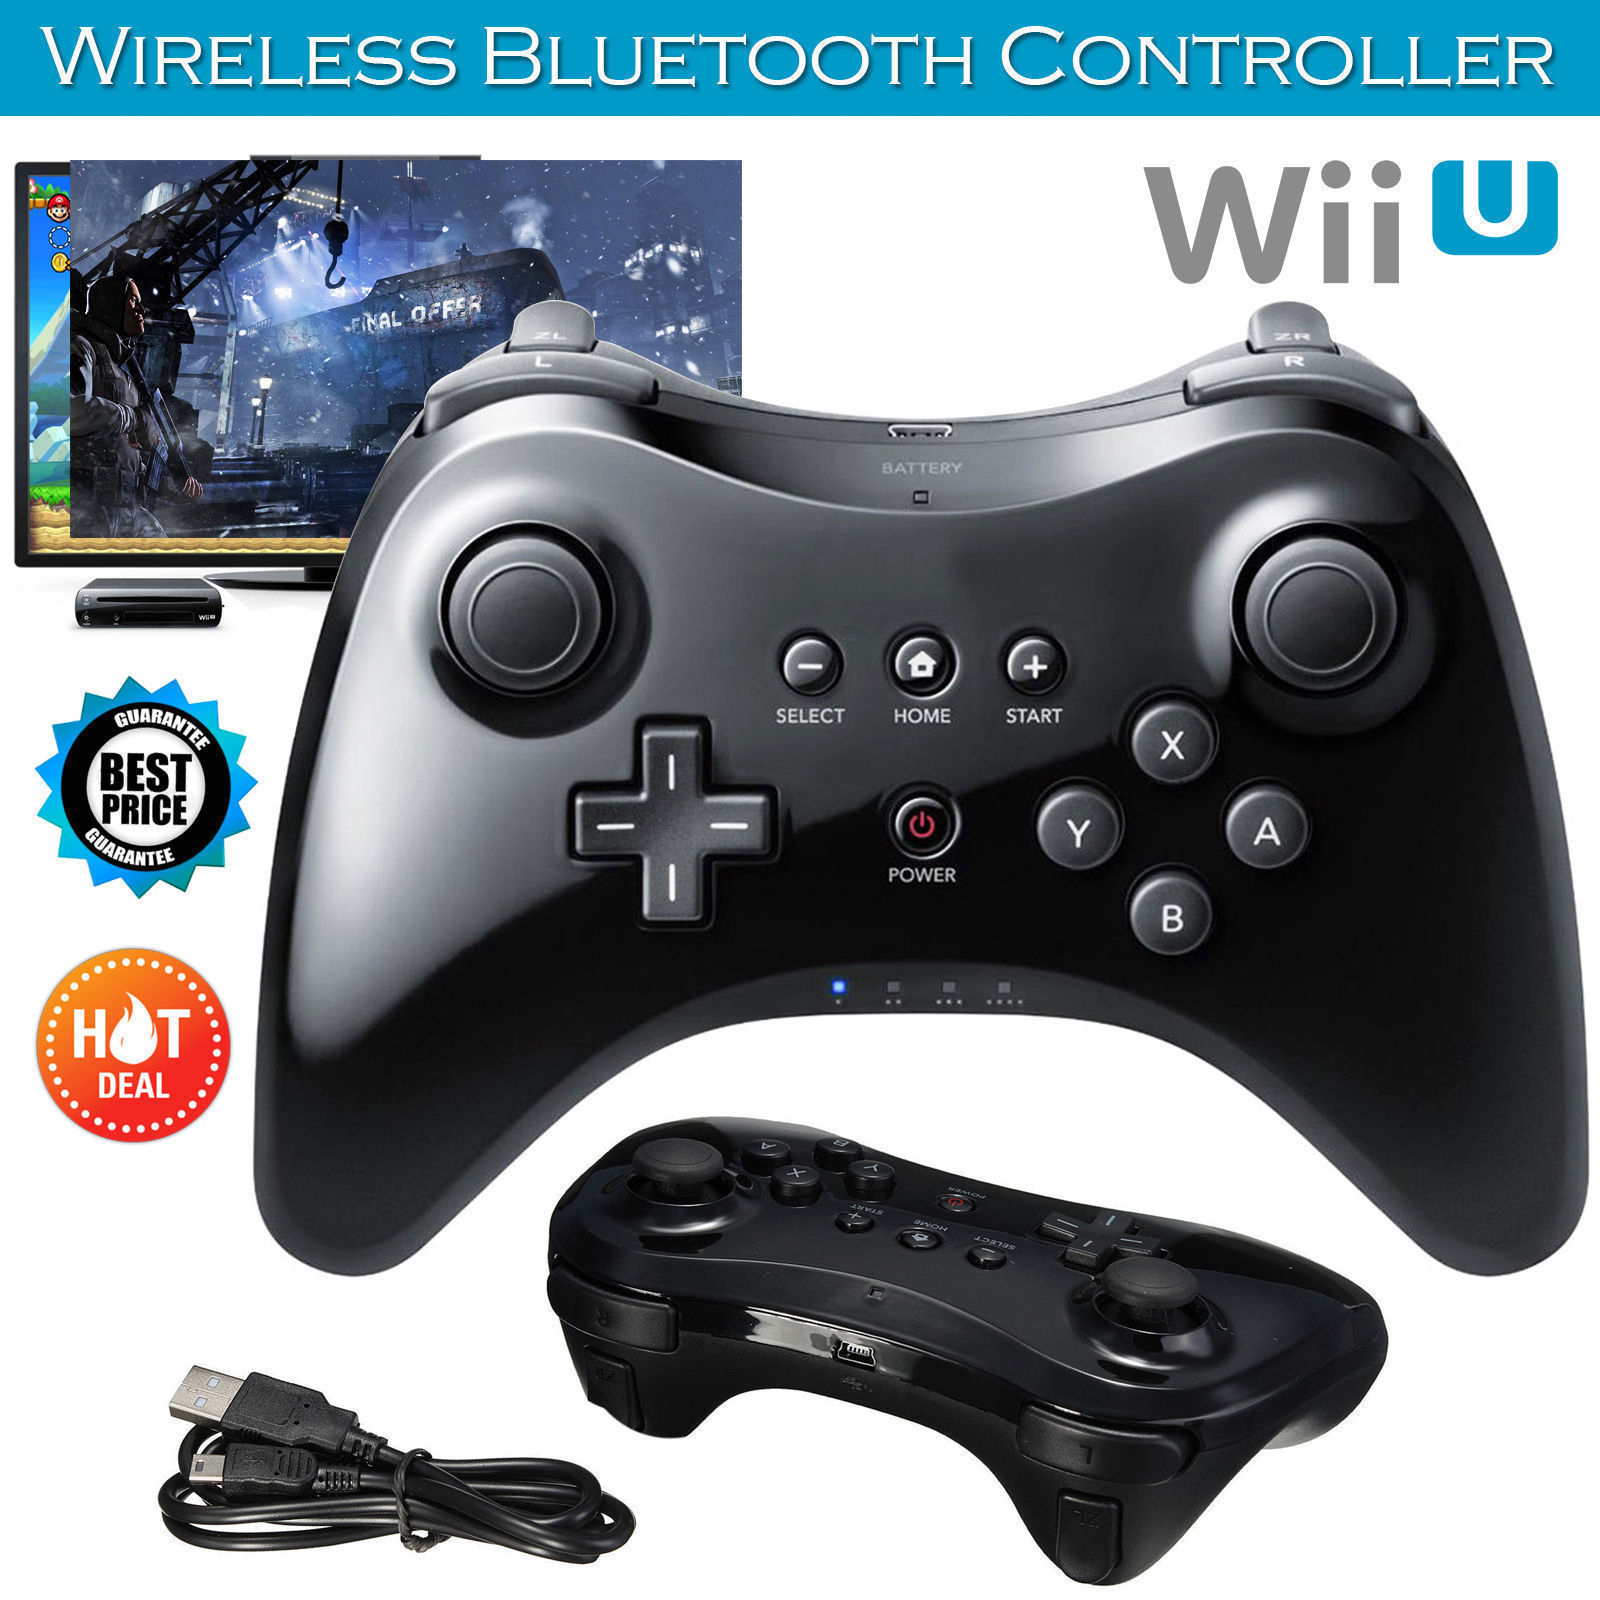 mash touch Drama Wireless Classic Pro Controller Joystick Gamepad For Nintend Wii U Pro With  Usb Cable Support Bluetooth Wireless Remote Control - Gamepads - AliExpress